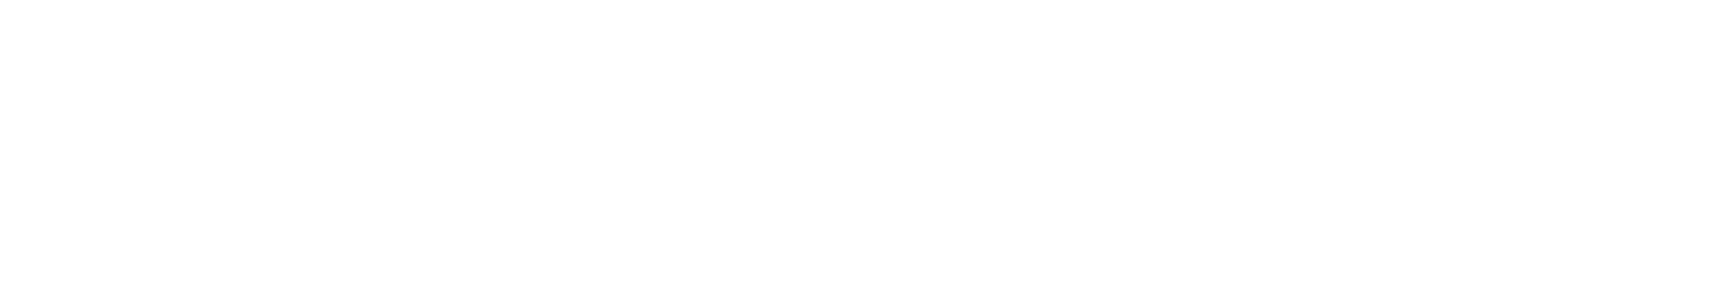 eatpos by clover epos systems